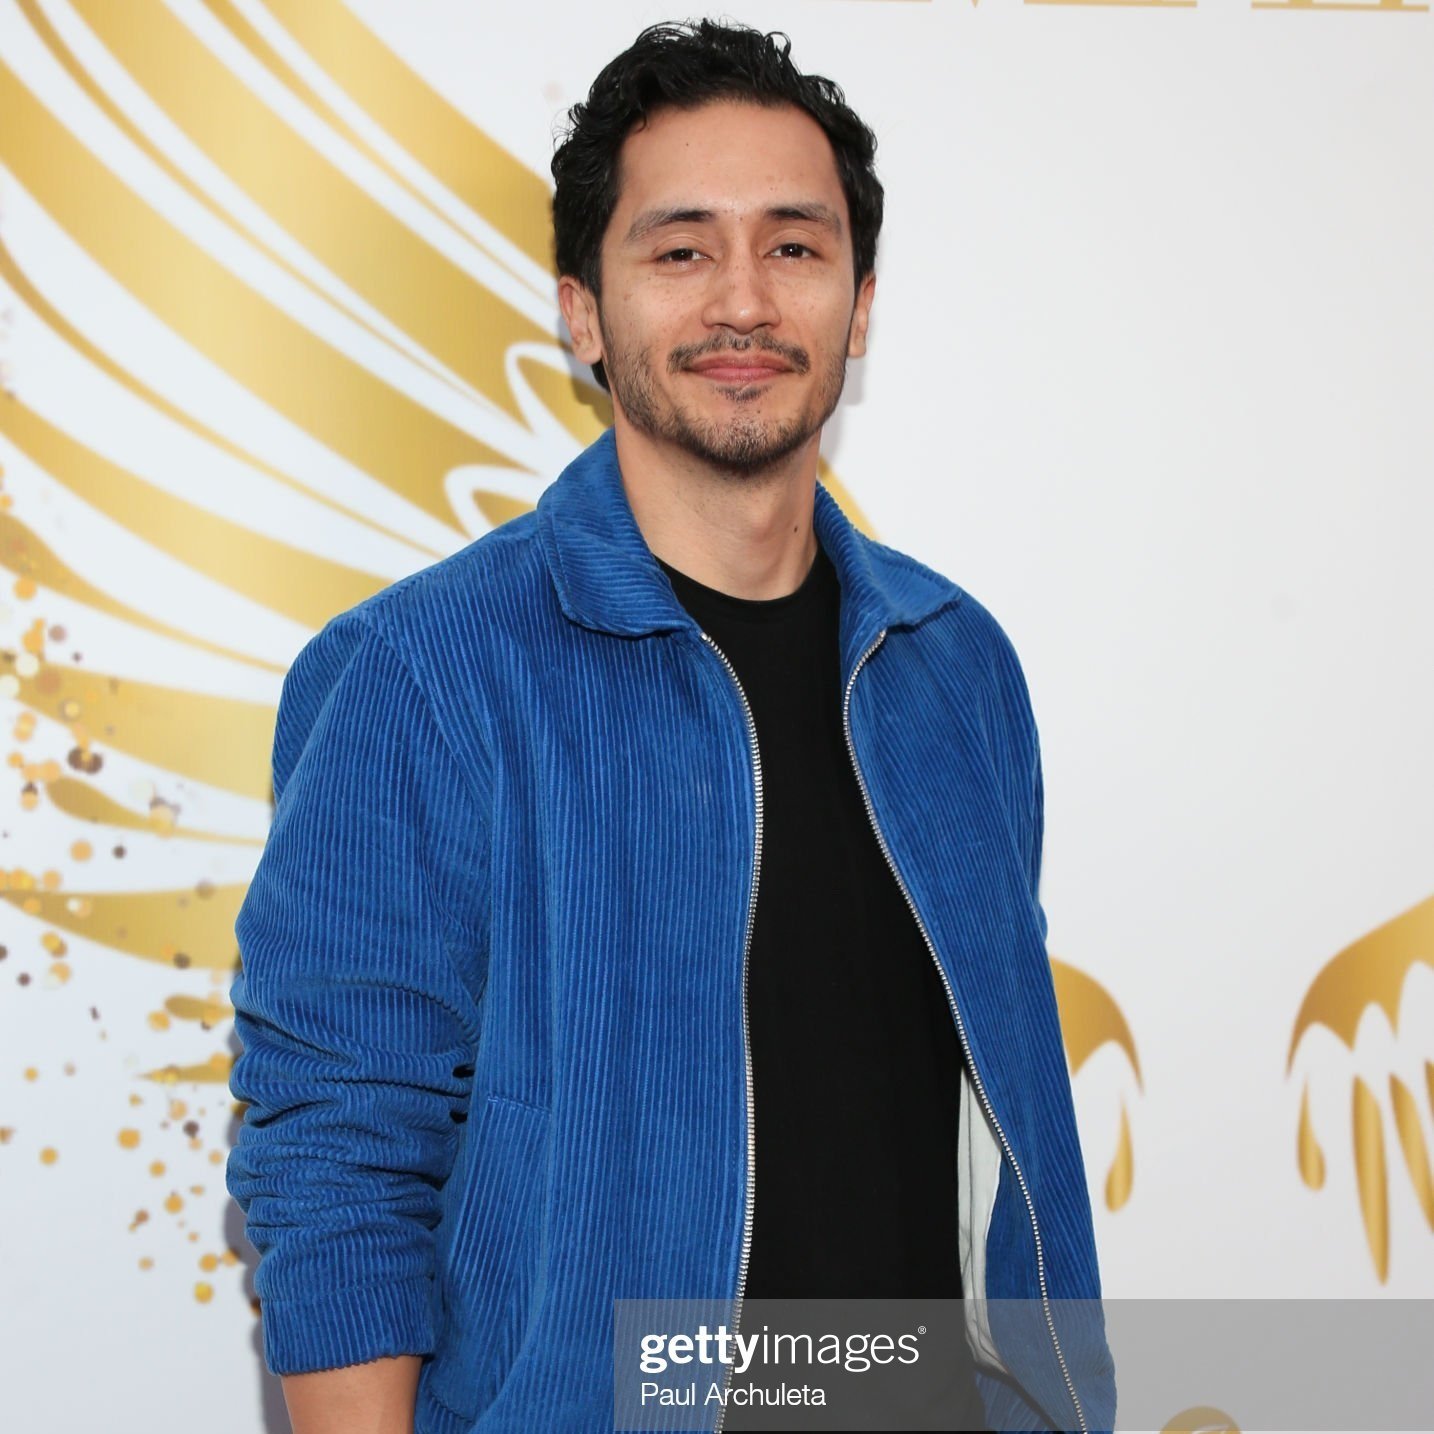 gettyimages-1371709514-2048x2048.jpg